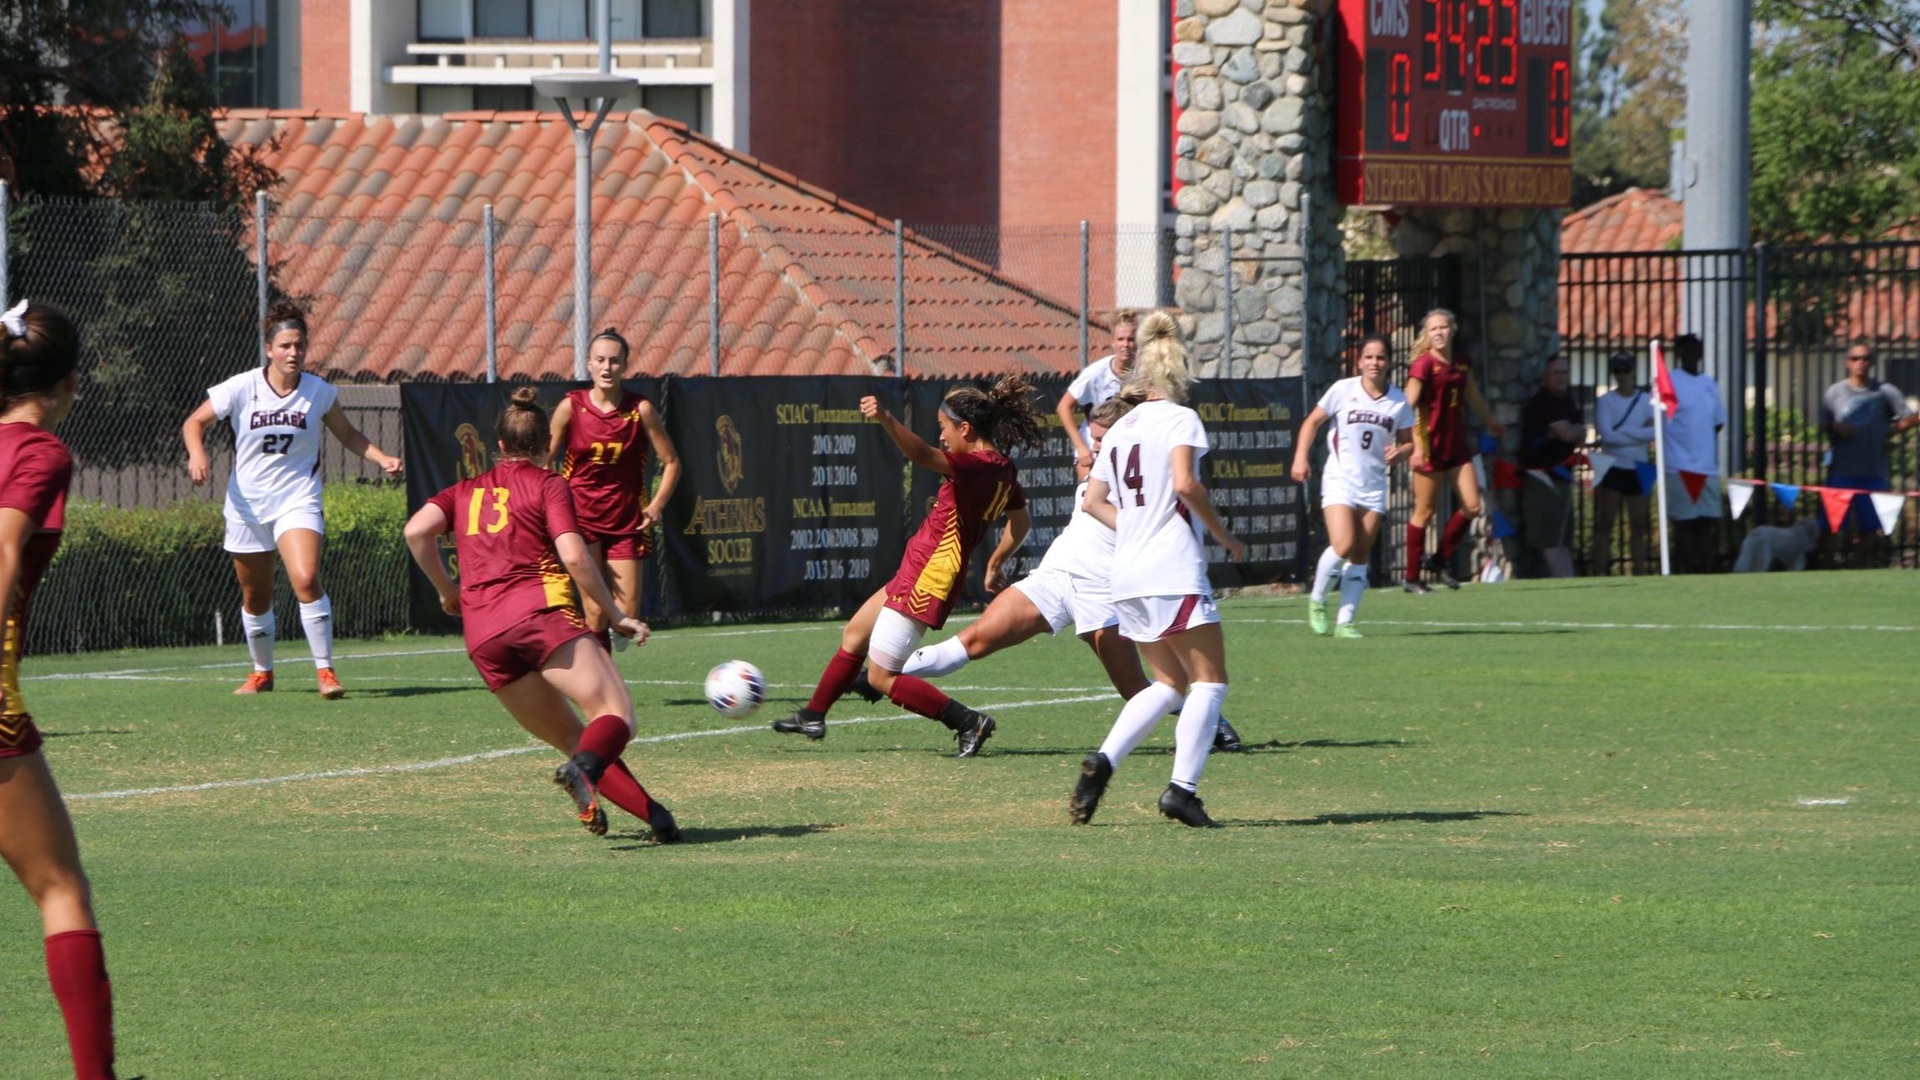 Jihae Oh put CMS ahead 1-0 with this goal (photo by Julian Rivera-Williams)